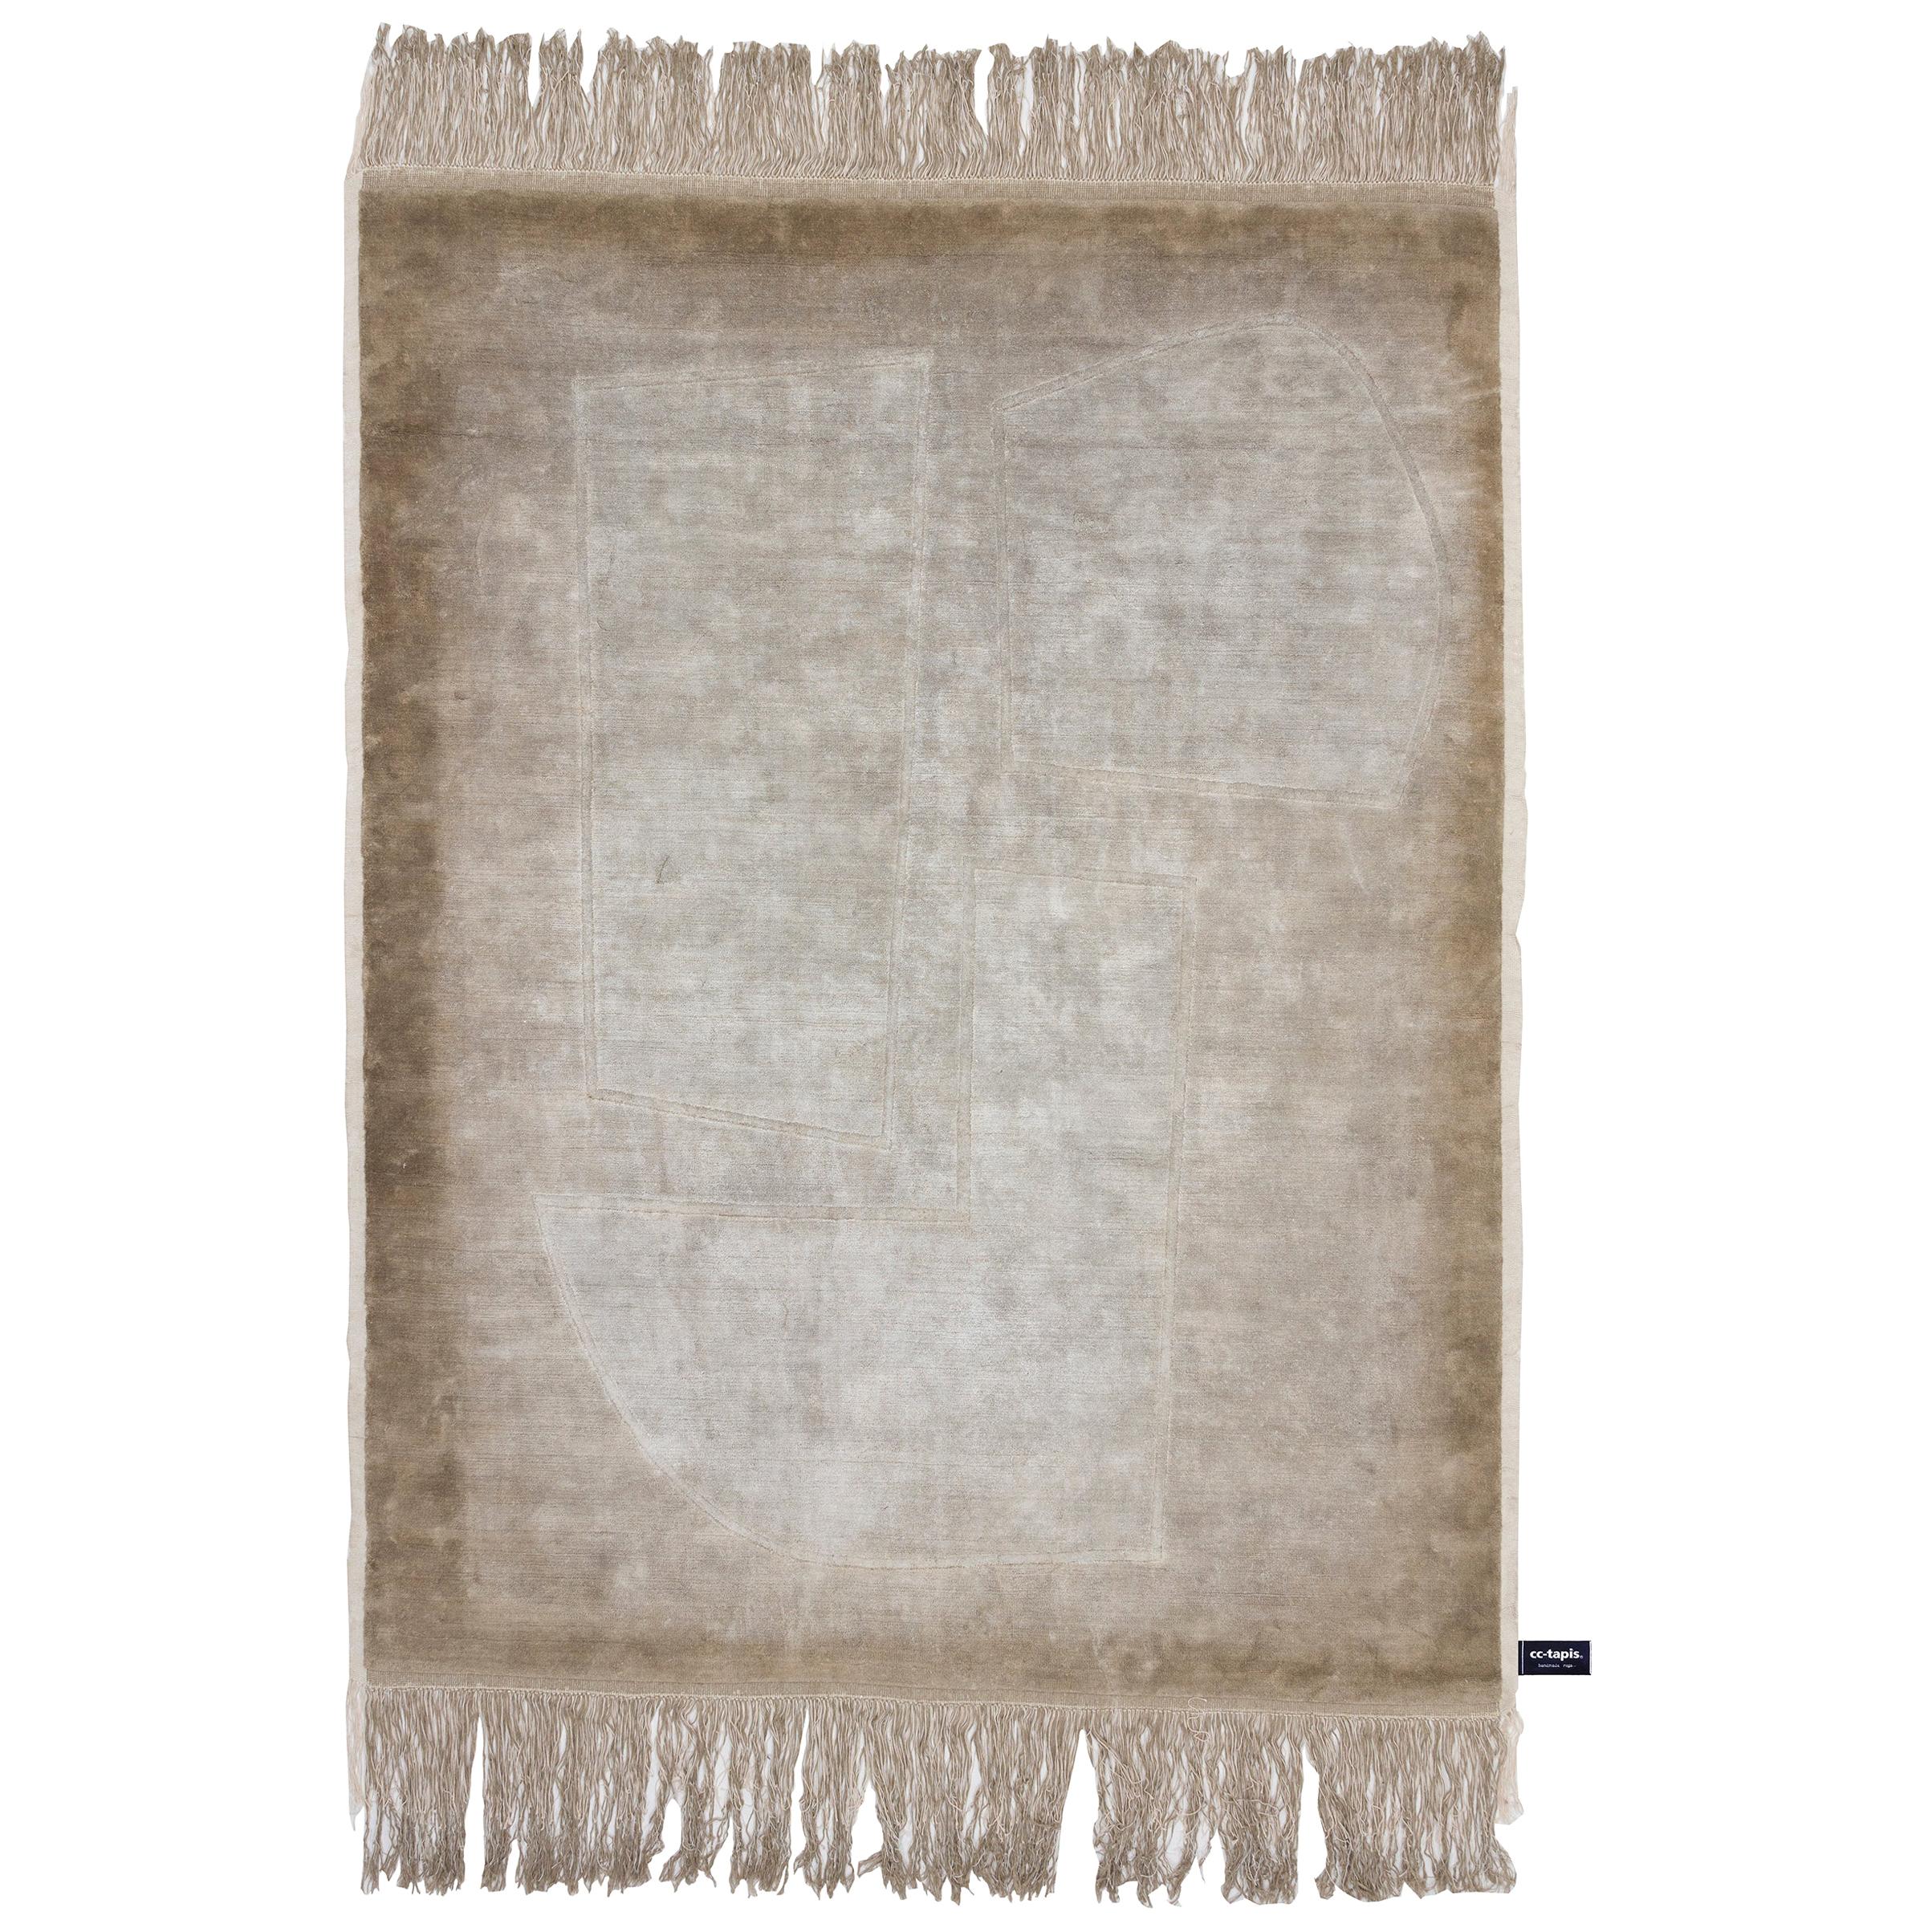 cc-tapis Inventory Patch Rug Raw by Faye Toogood